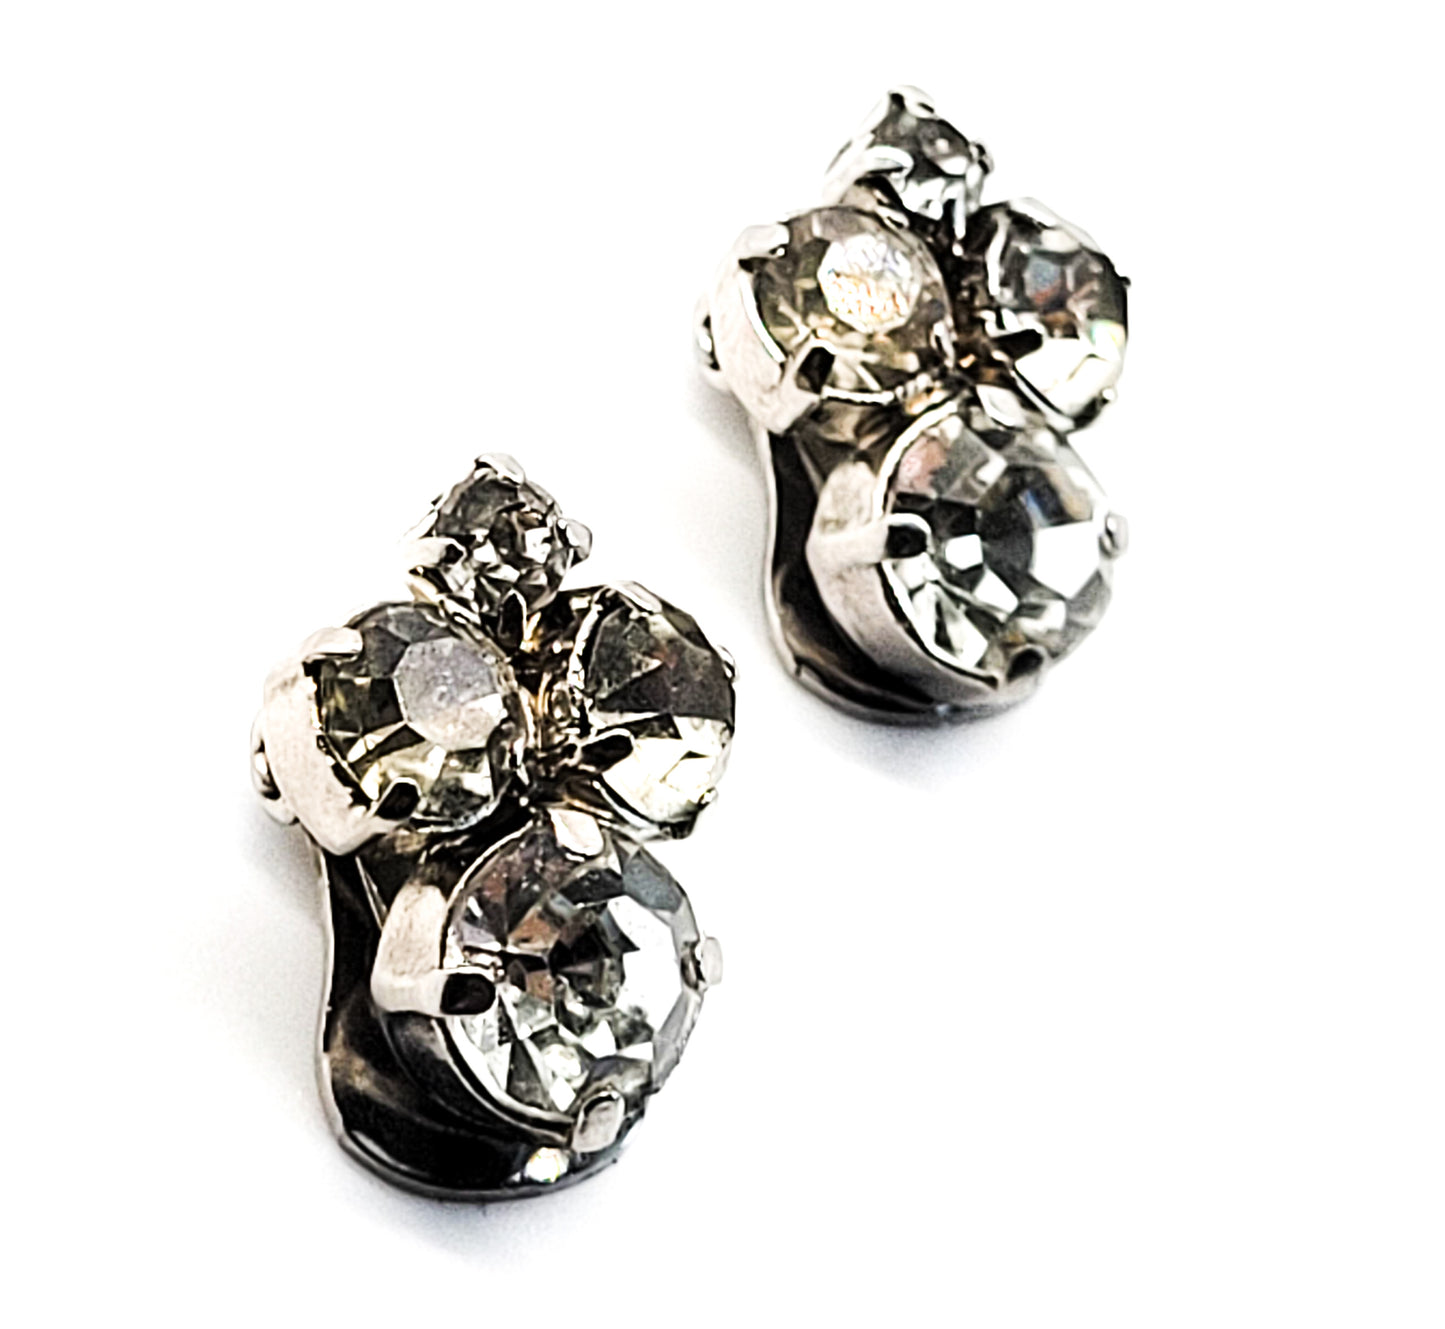 Bright vintage clear rhinestone silver toned button clip on earrings mid century